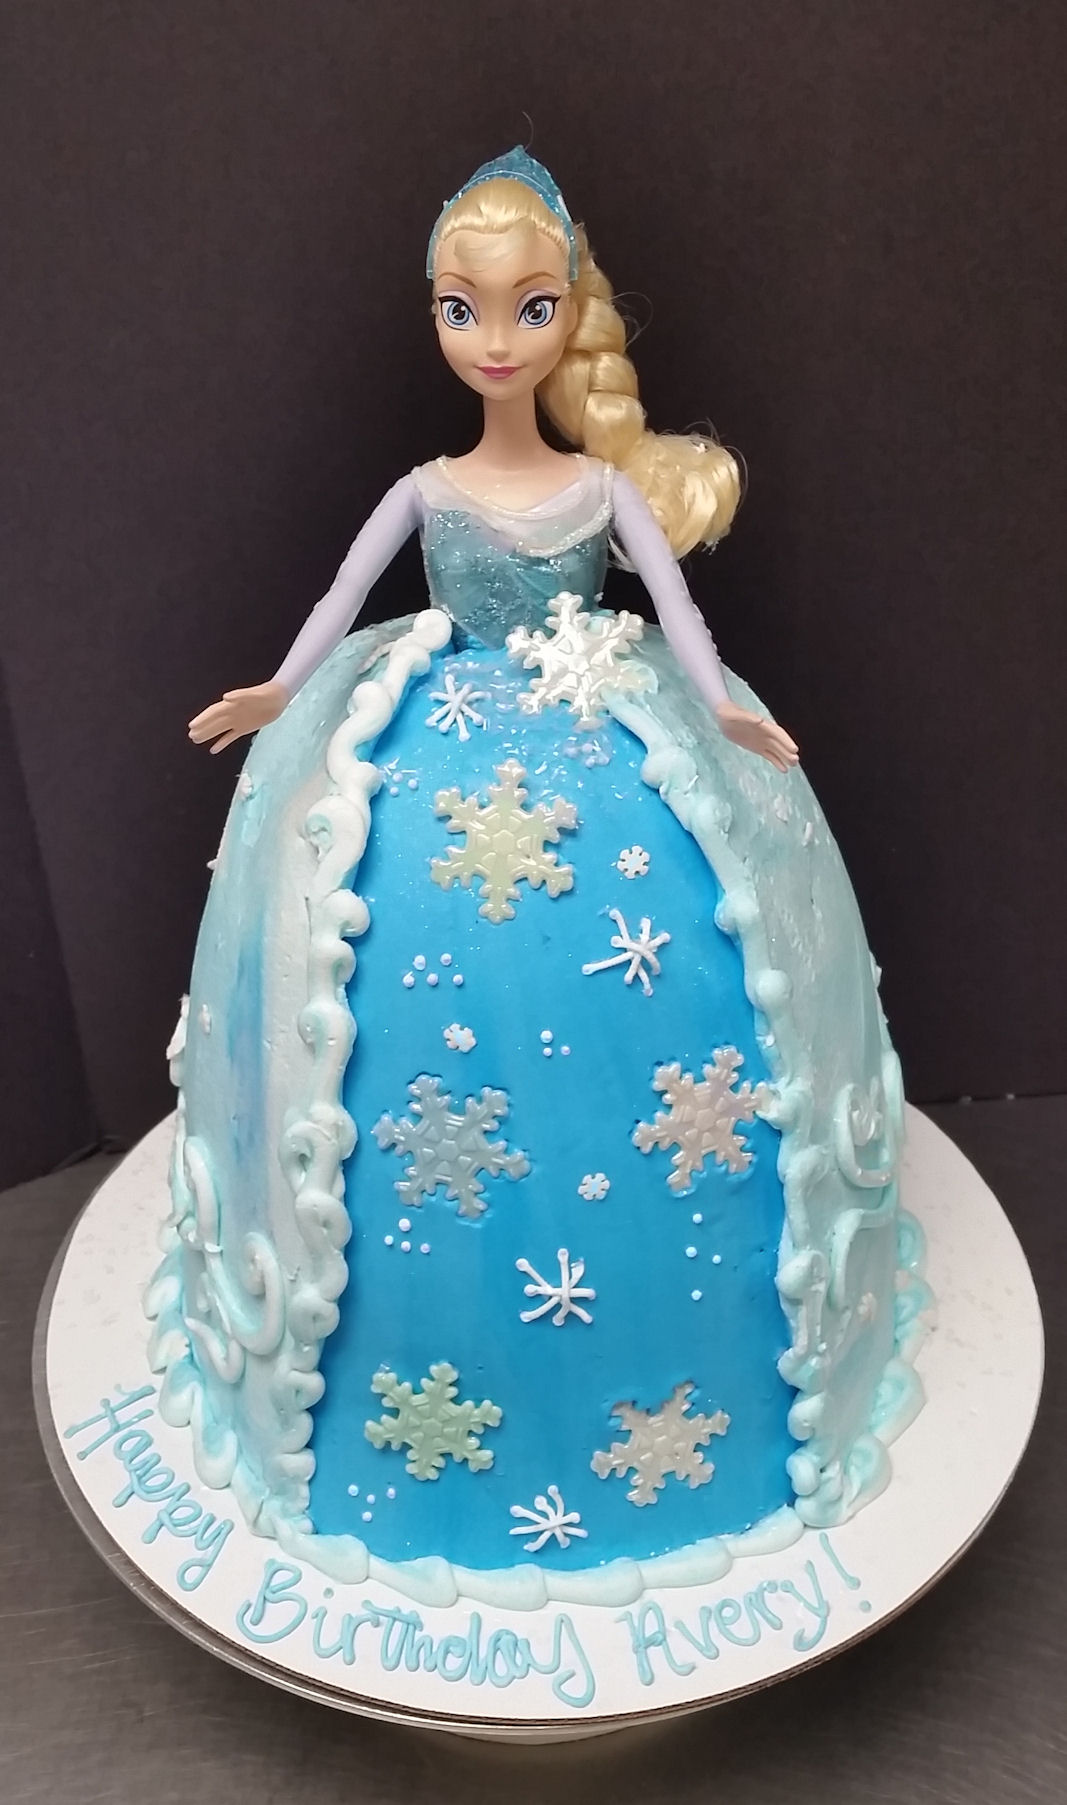 Delectable Frozen Inspired Birthday Cakes